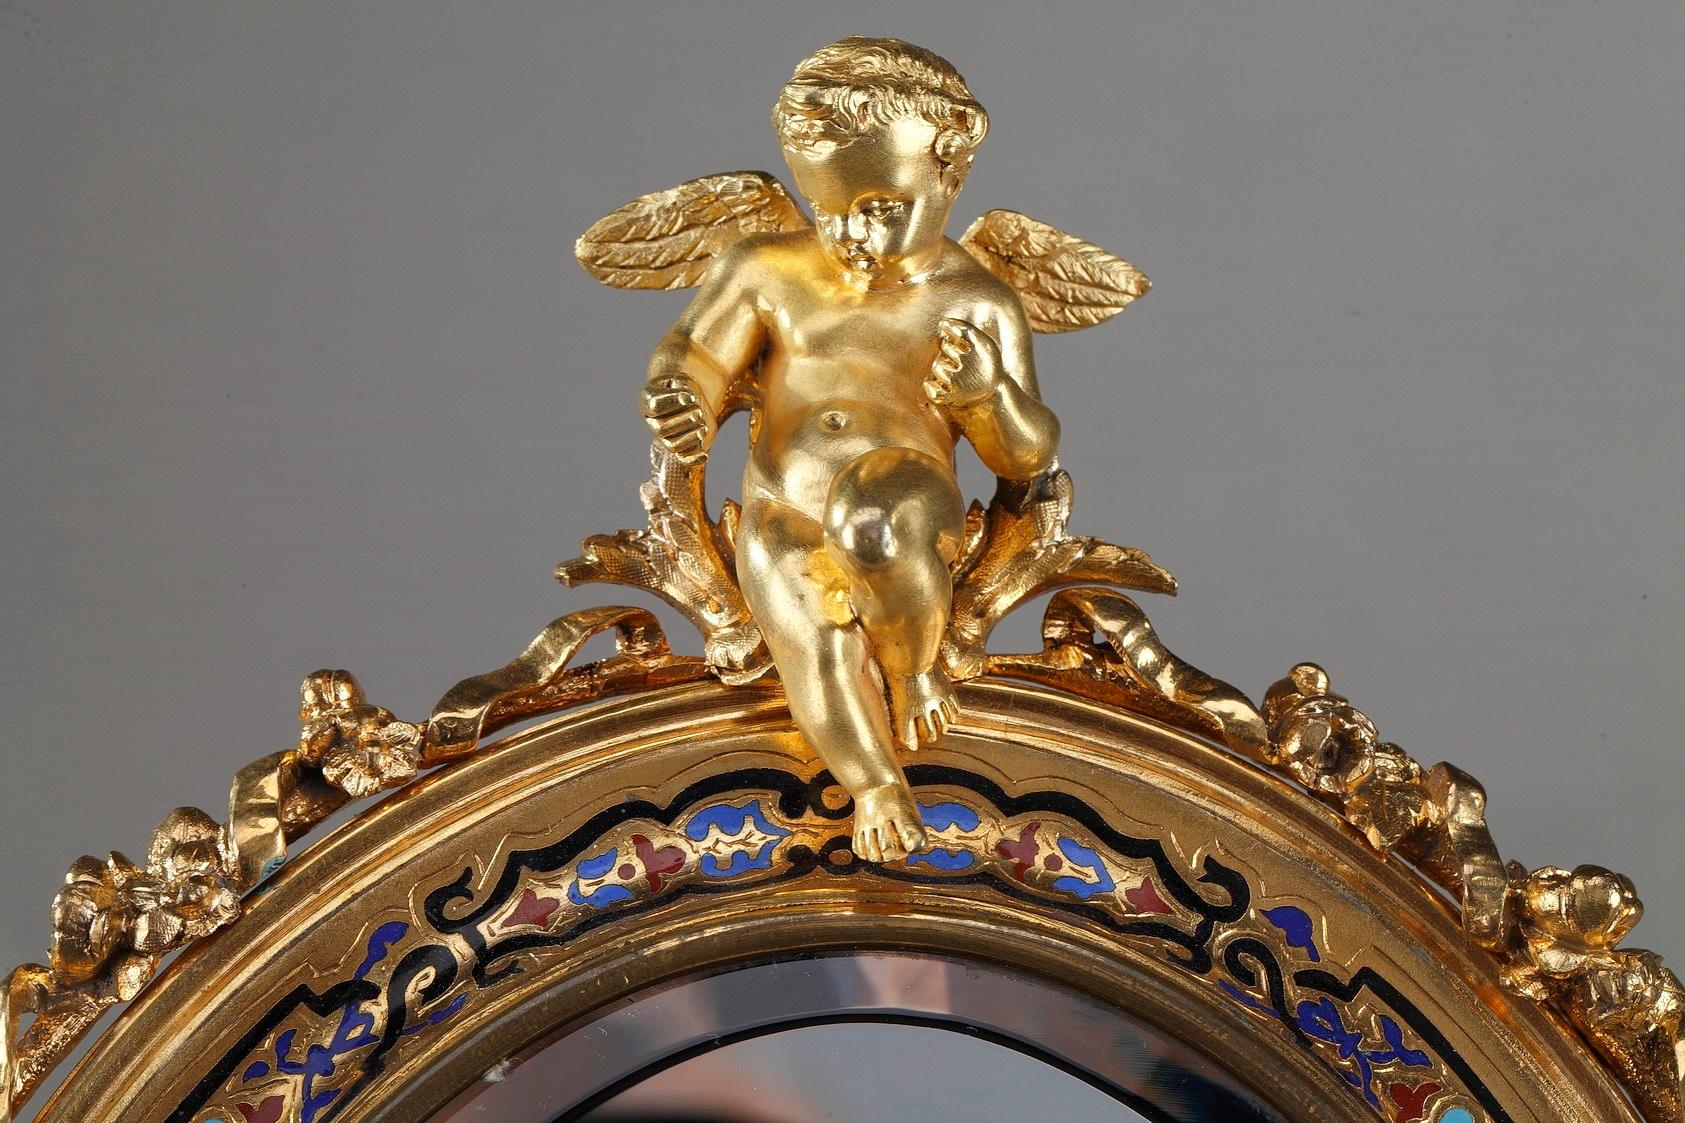 Small standing mirror with ormolu, or gilt bronze, frame covered in an exquisite design of champlevé enameling, with delicate interlacing and floral motifs. A gilt bronze winged putto adorn the top of this antique mirror glass. It is set on an